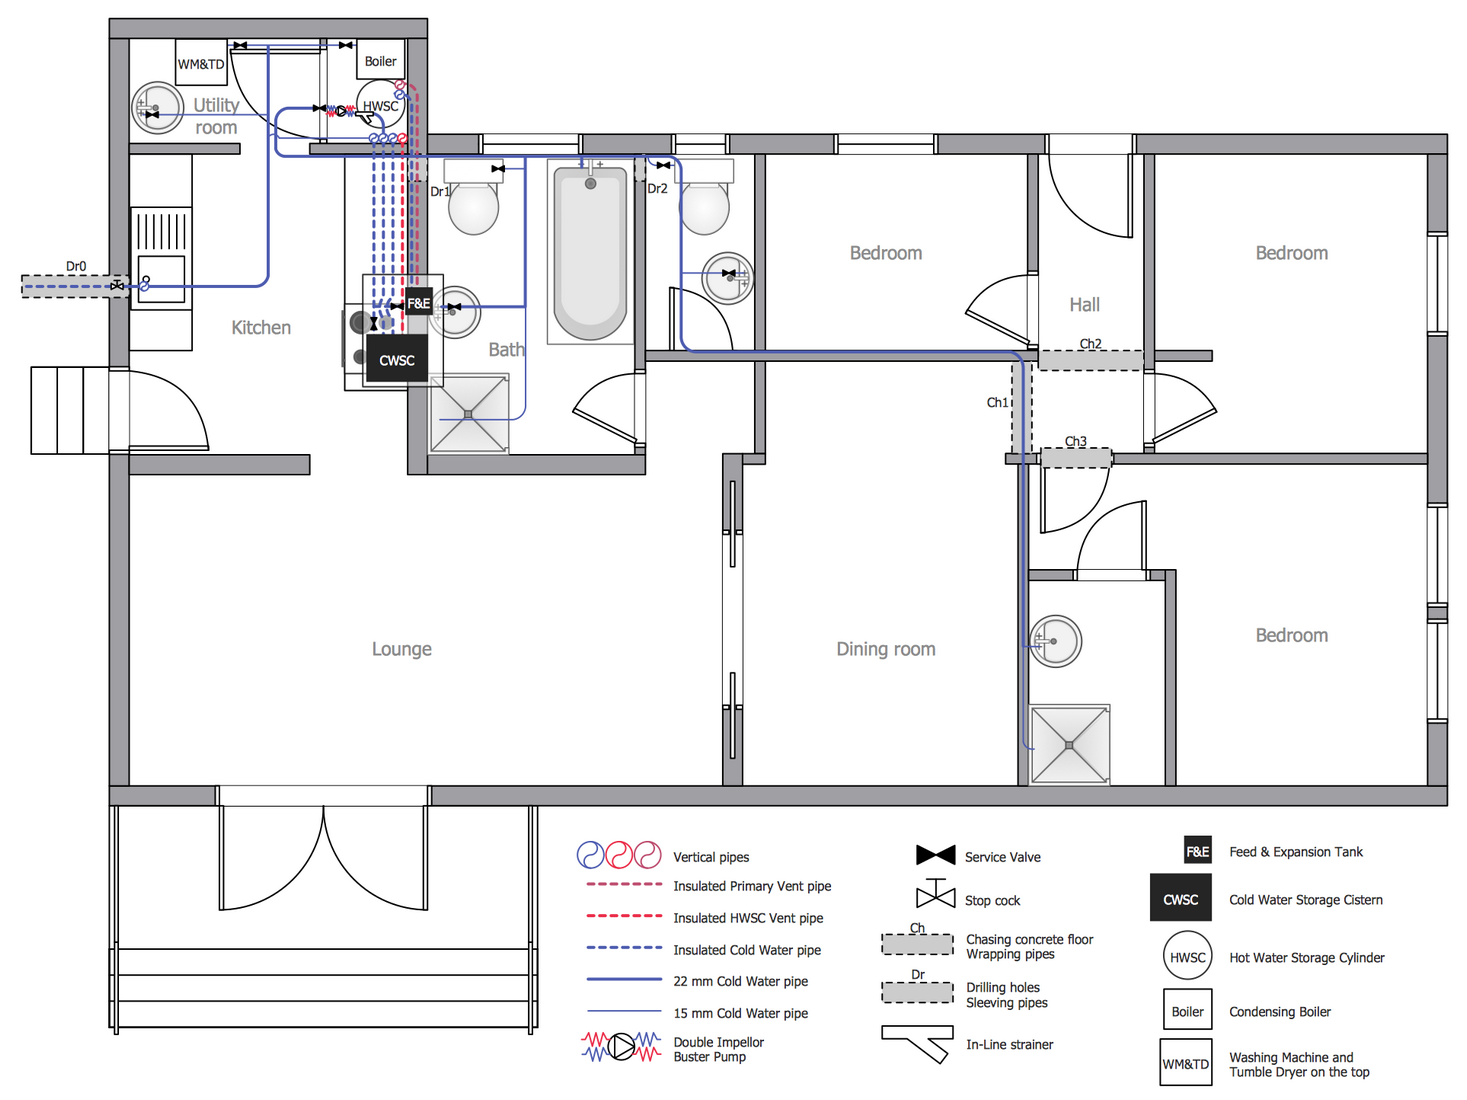 Plumbing and Piping Plans Solution